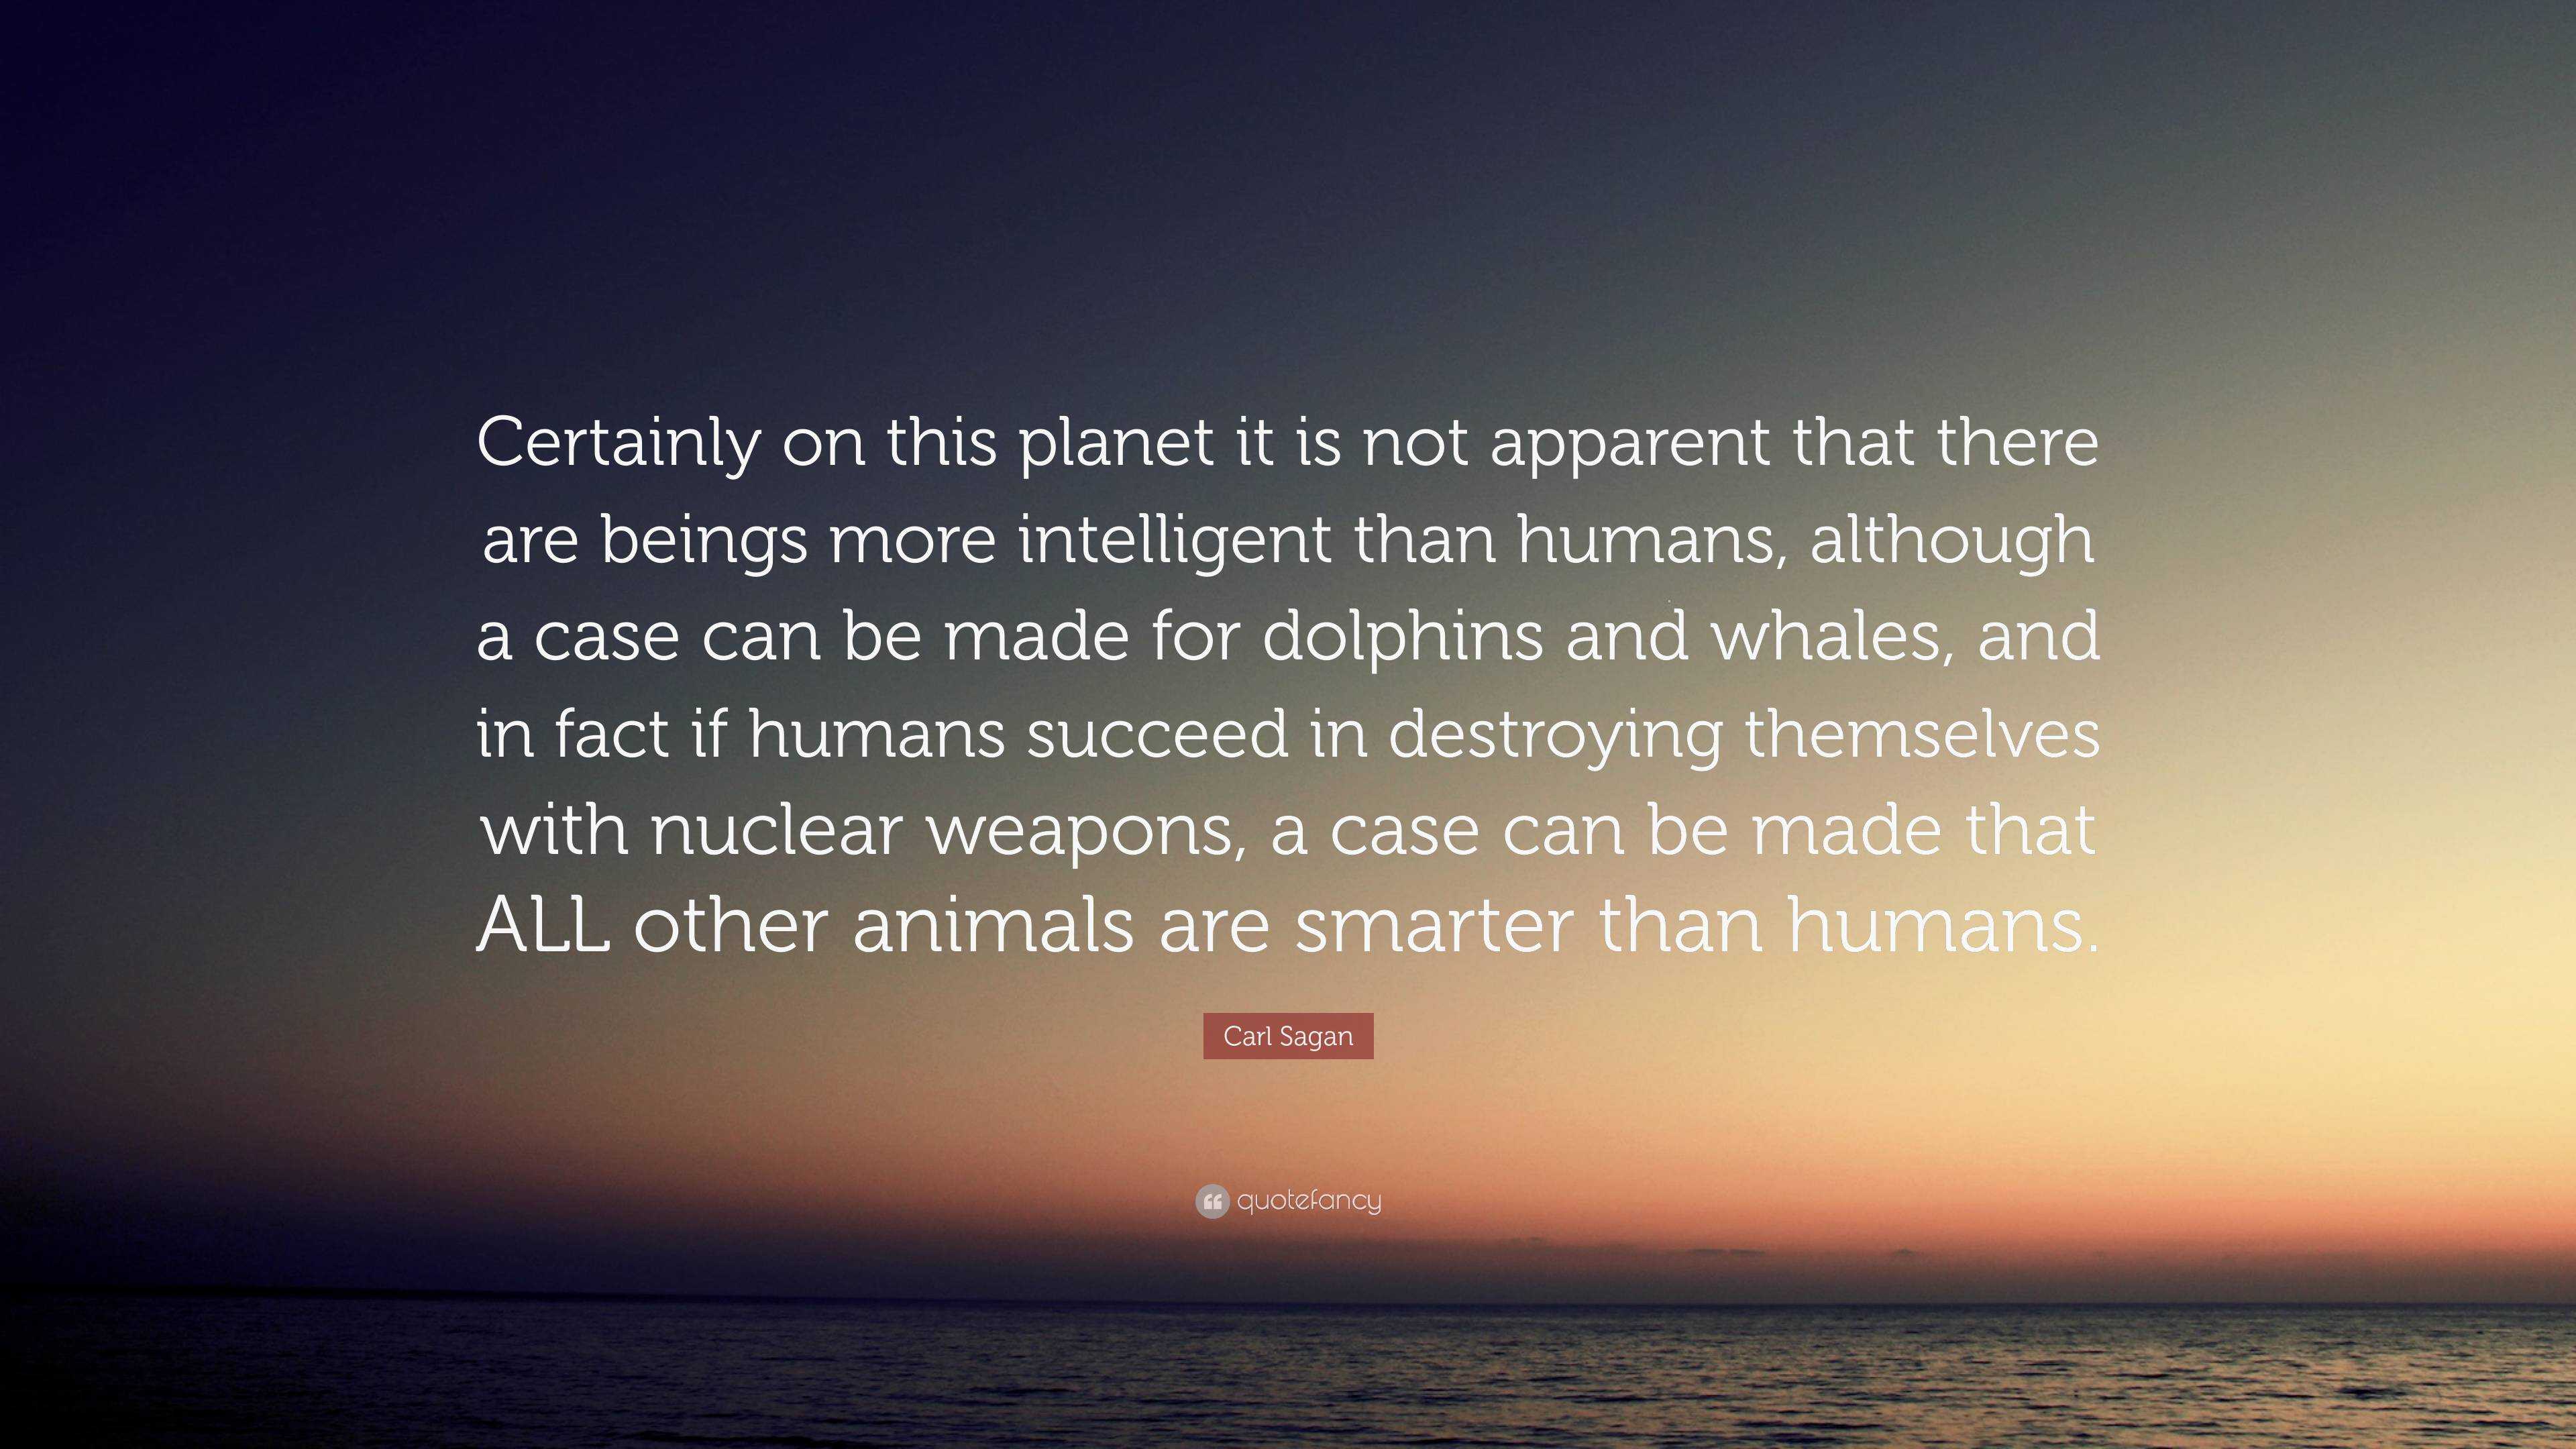 Carl Sagan Quote: “Certainly on this planet it is not apparent that there  are beings more intelligent than humans, although a case can be m...”